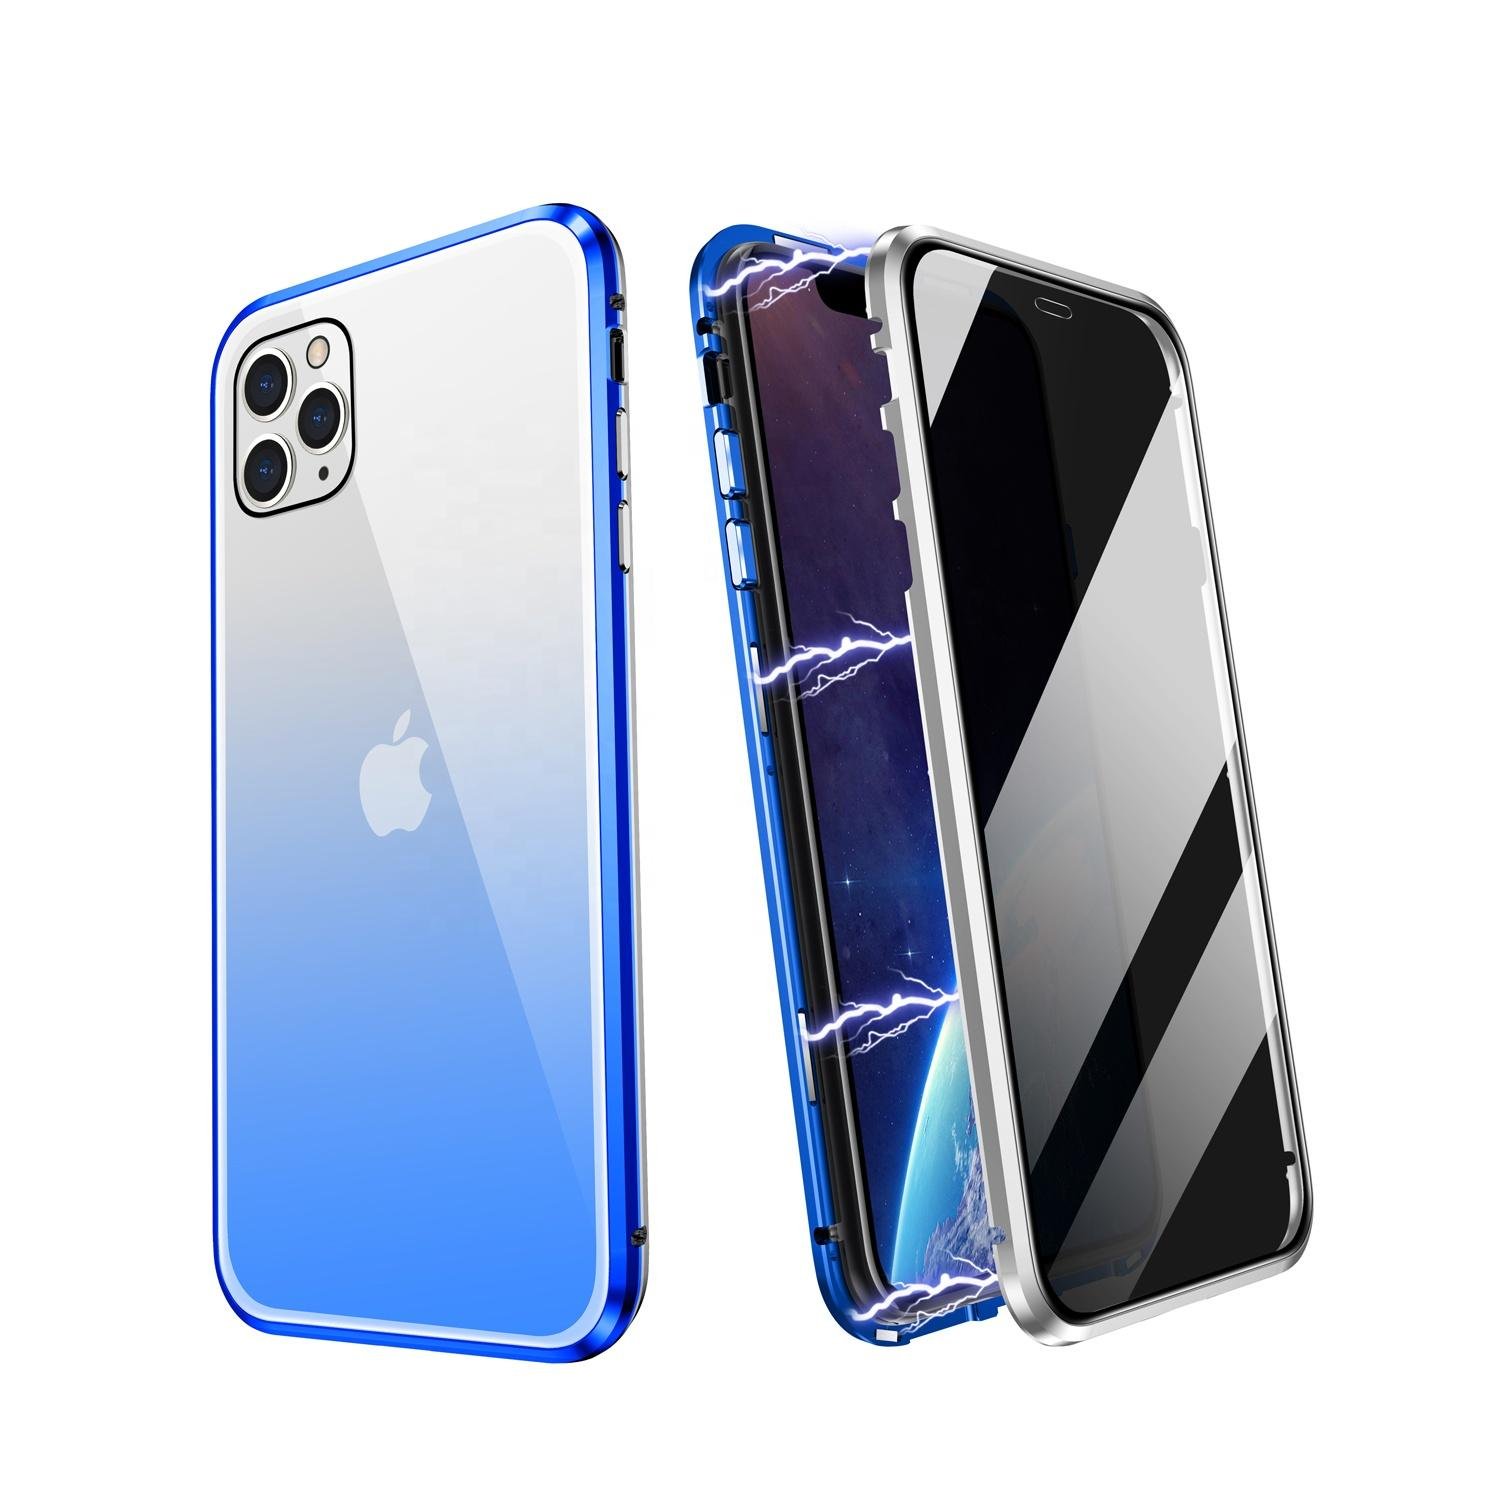  Double Sided Tempered Glass Phone Case for iPhone 11 Pro 8